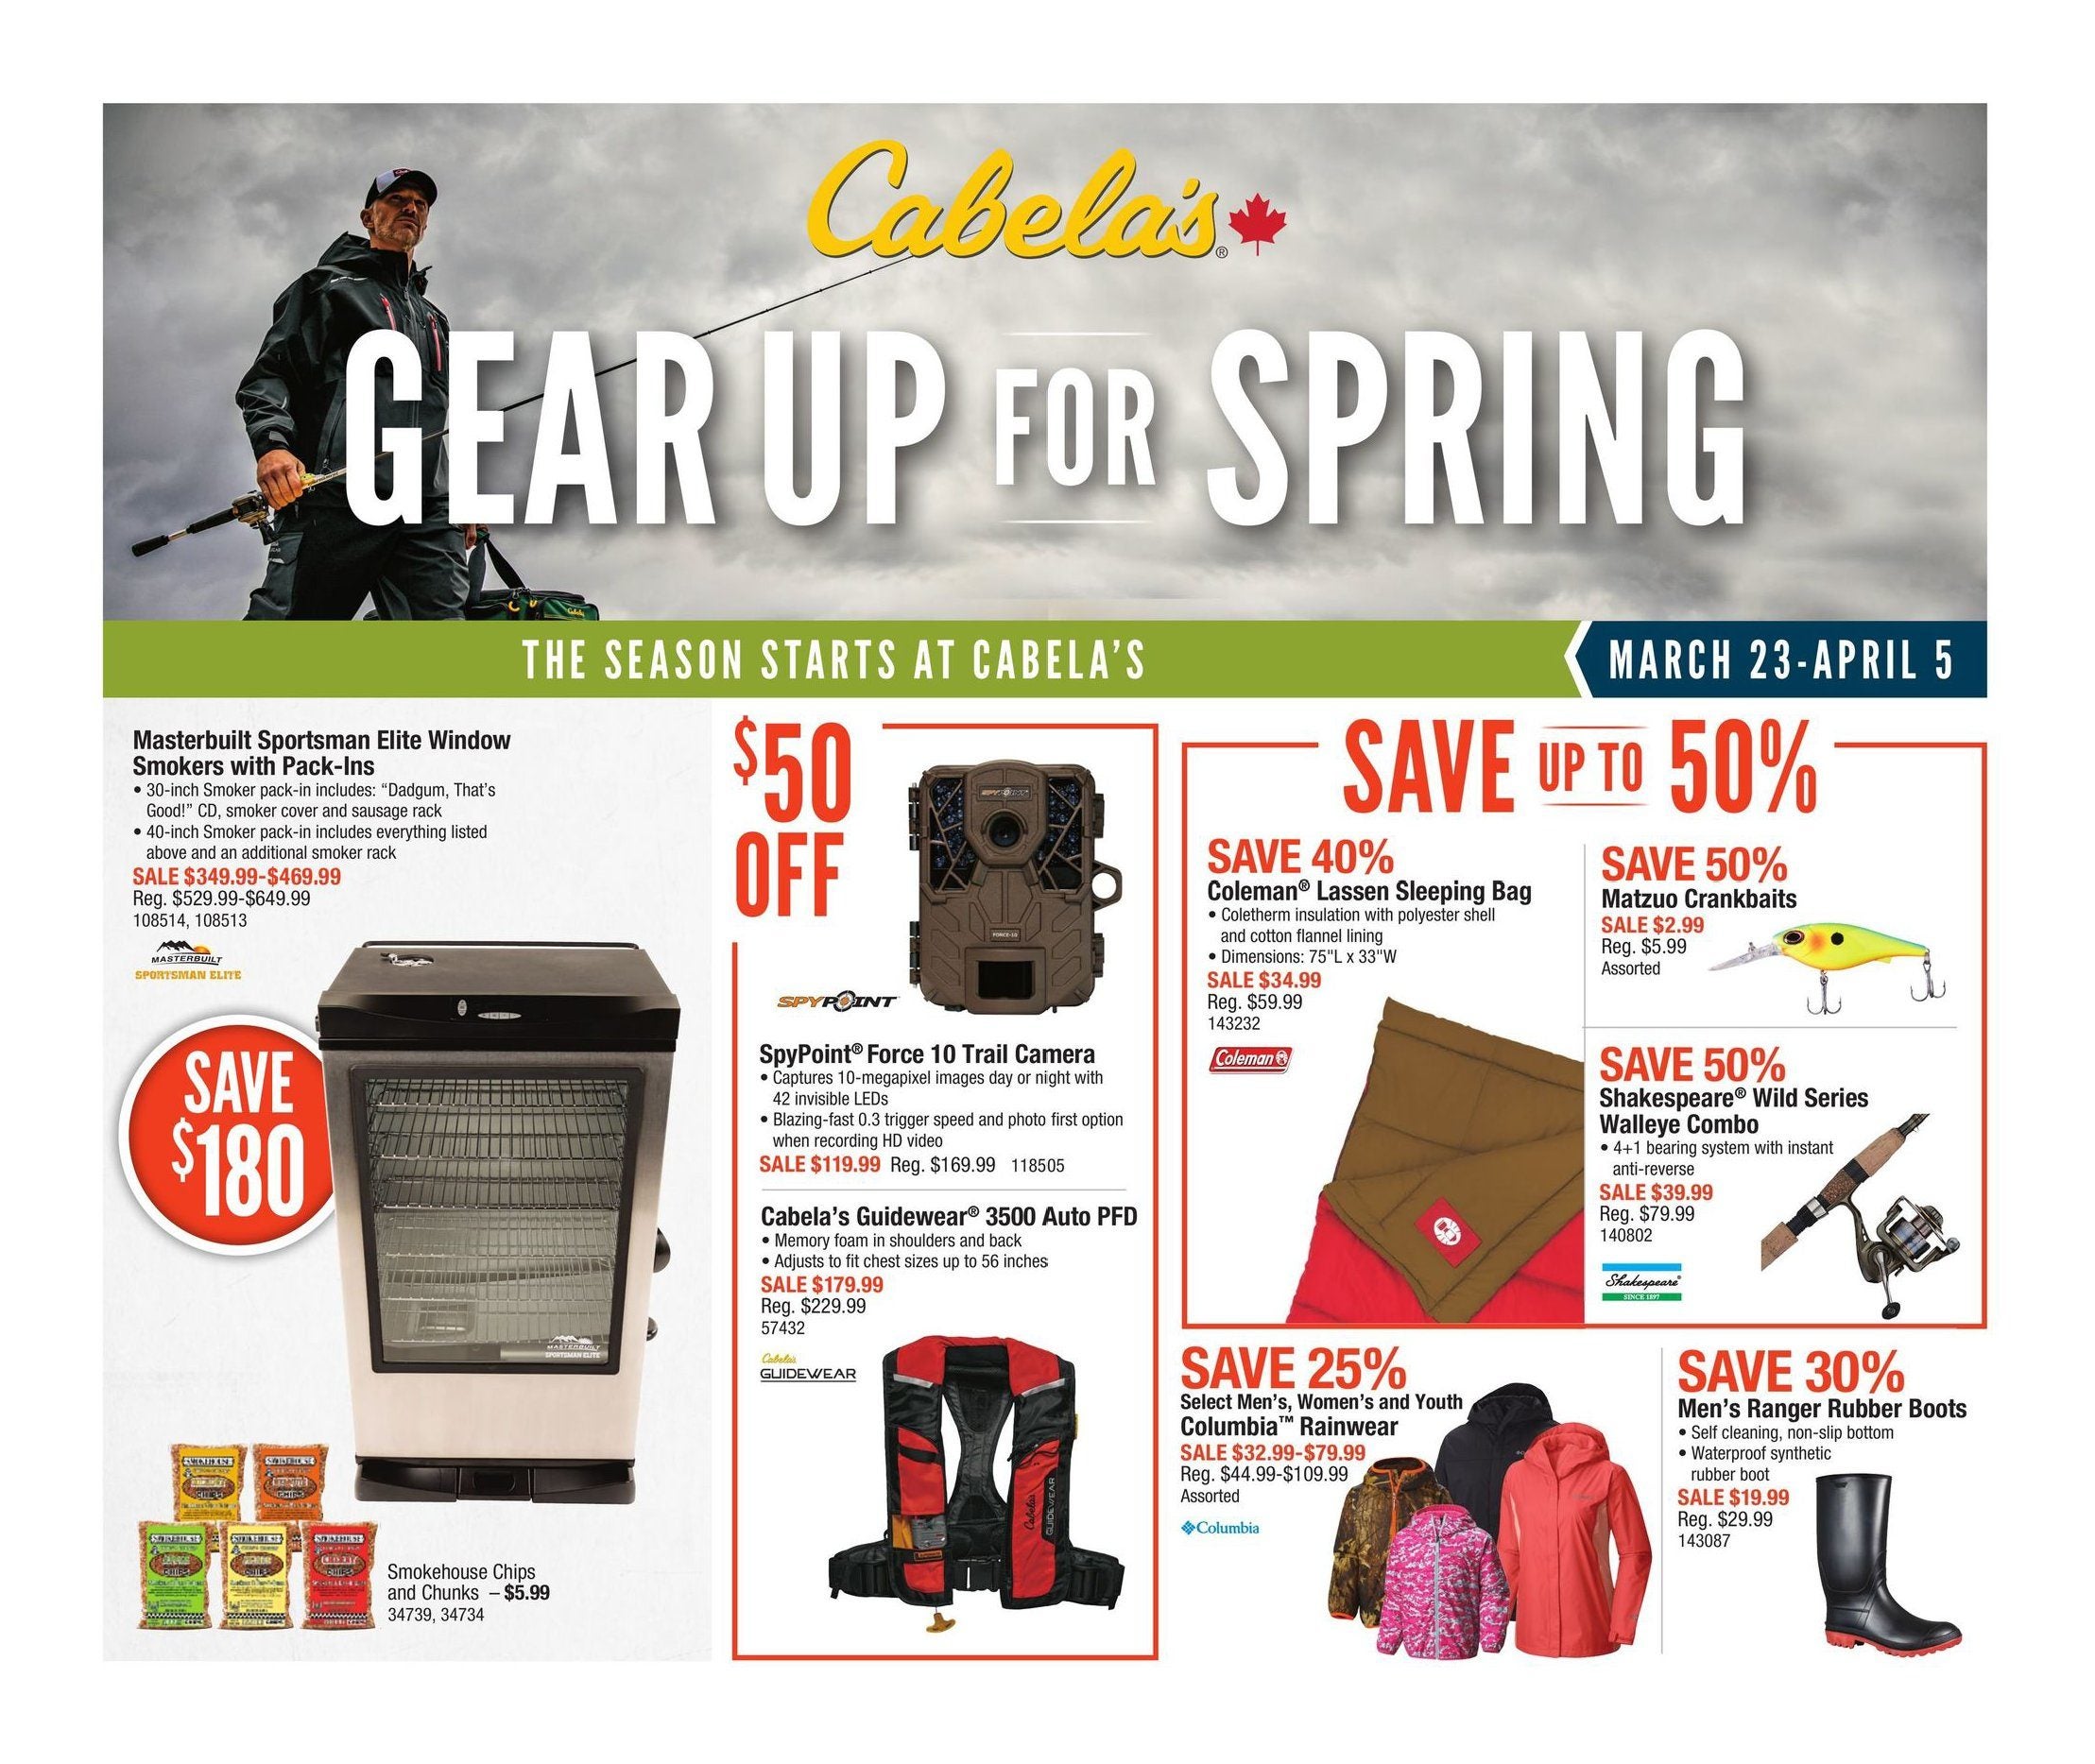 Cabelas Weekly Flyer - Spring Great Outdoor Days - Apr 6 – 19 